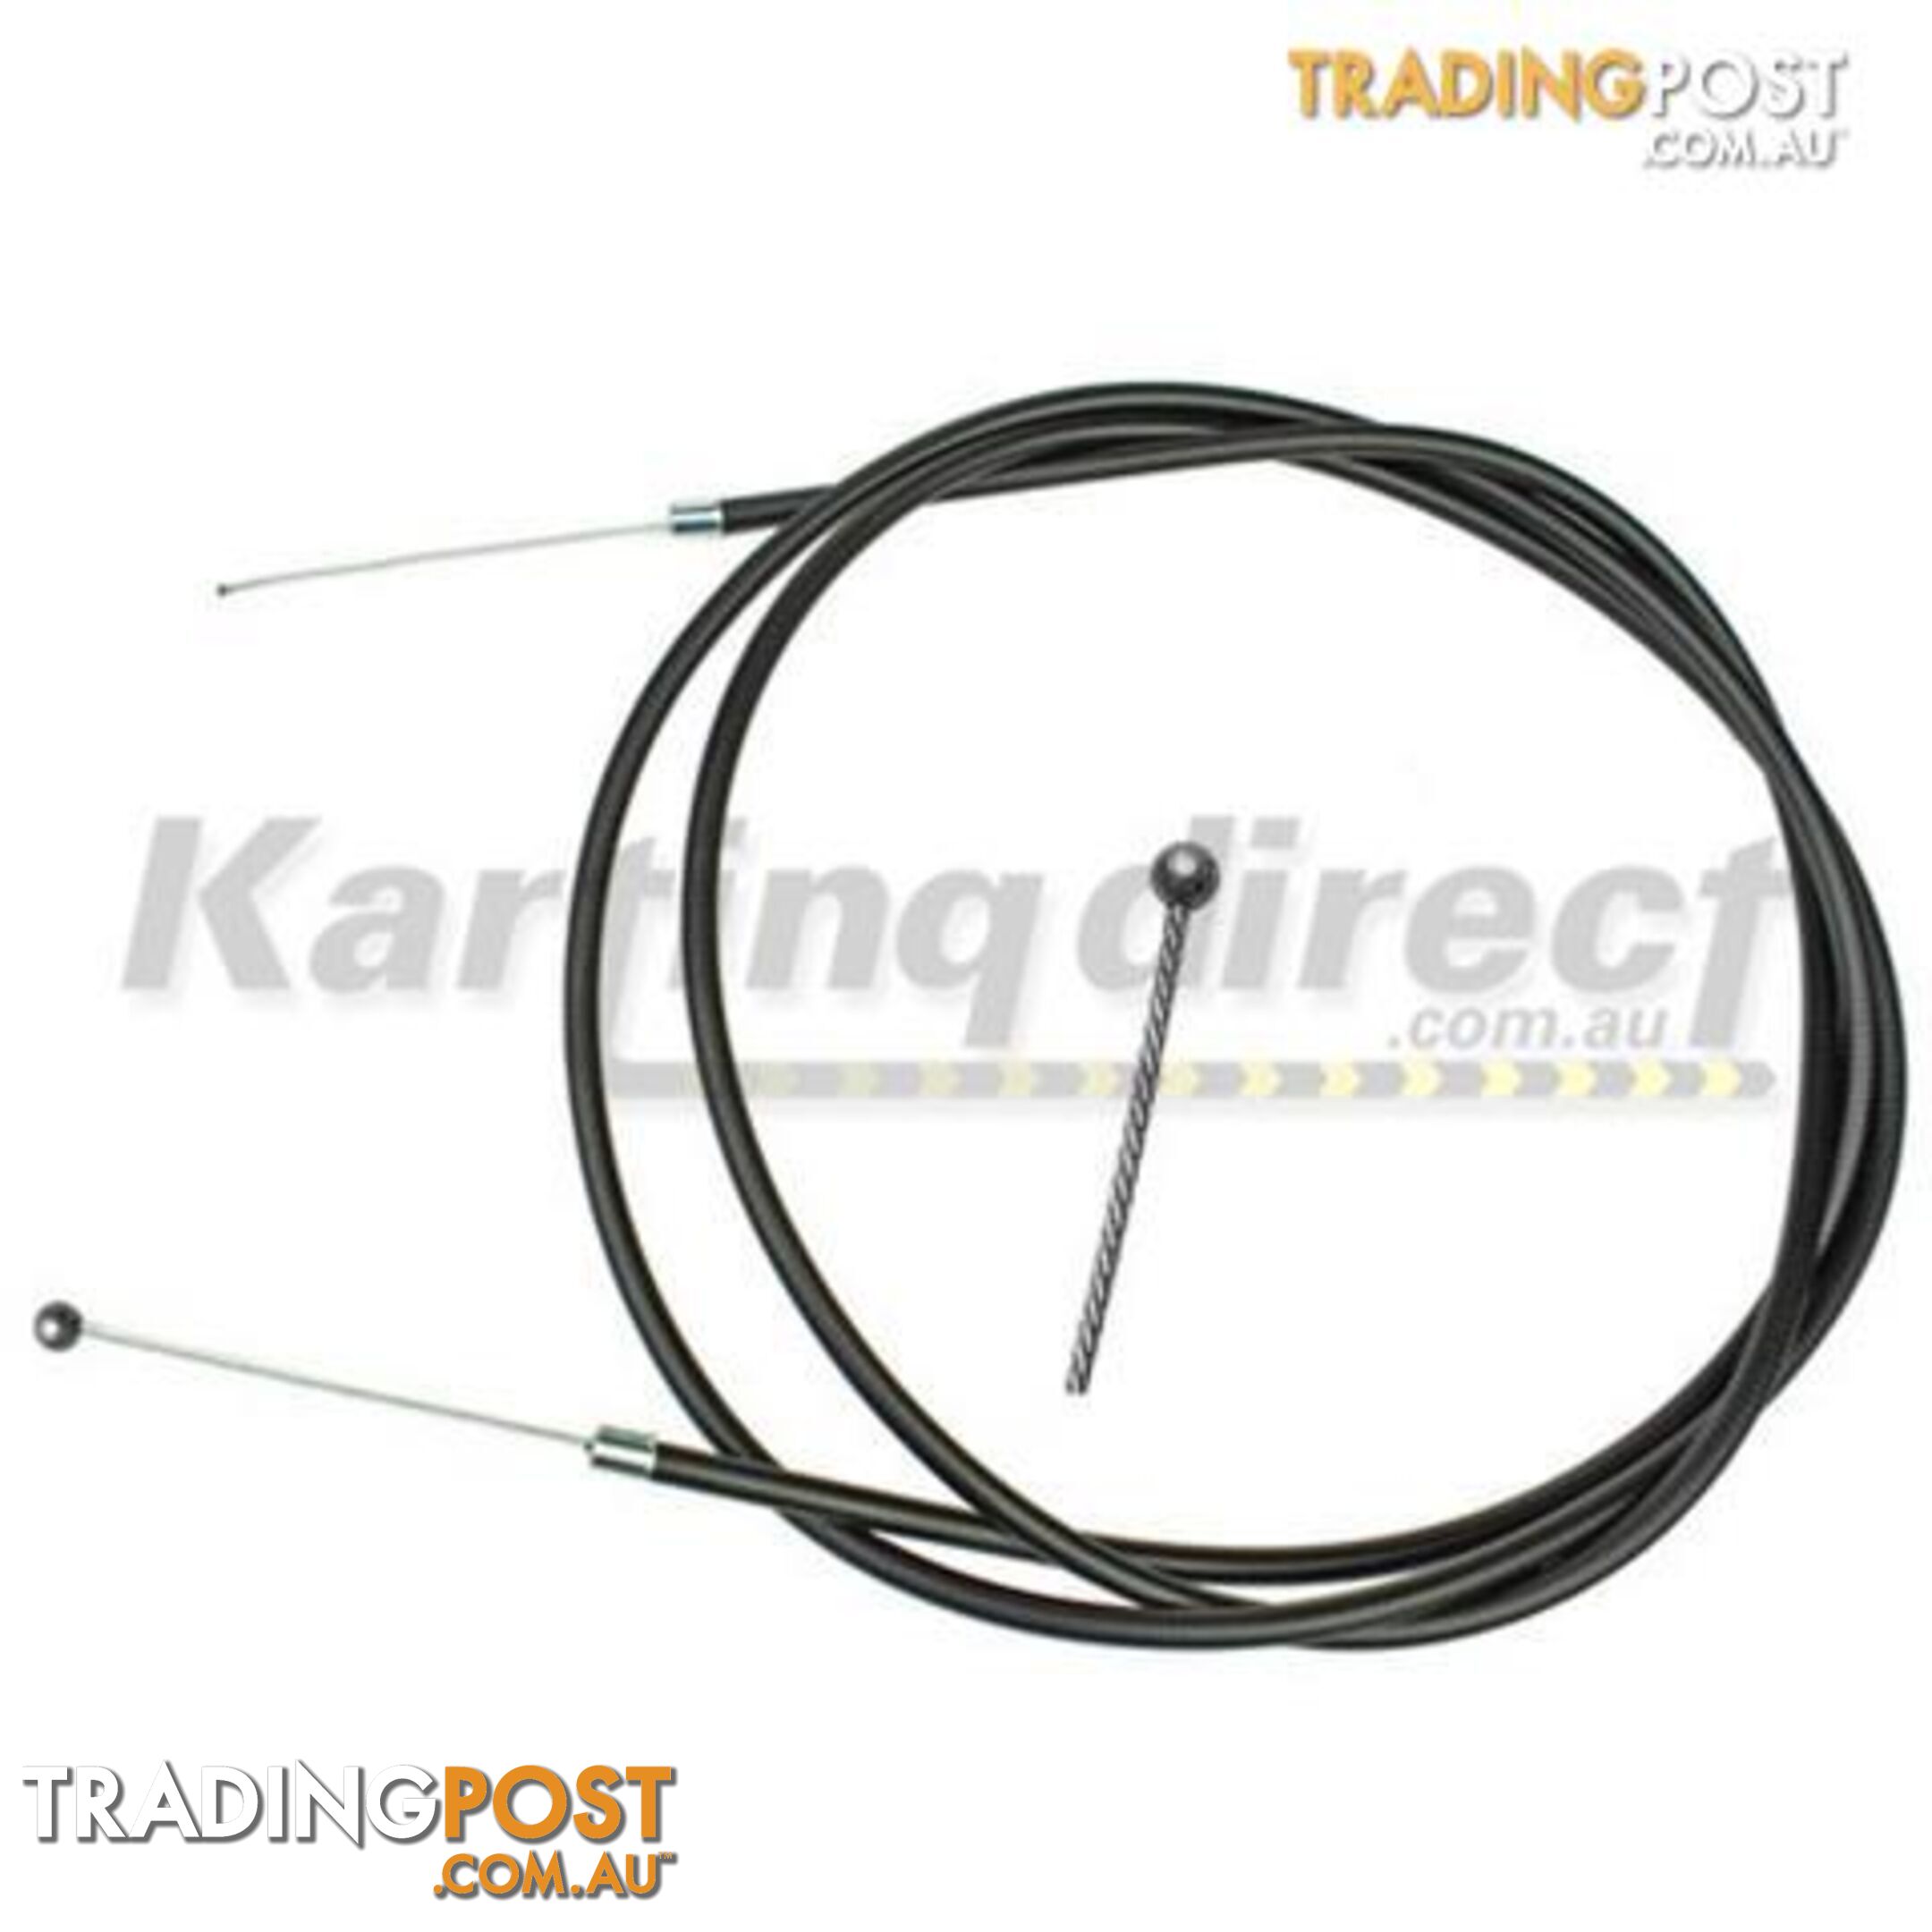 Go Kart Brake Cable Ball End Inner Cable 1900mm - ALL BRAND NEW !!!